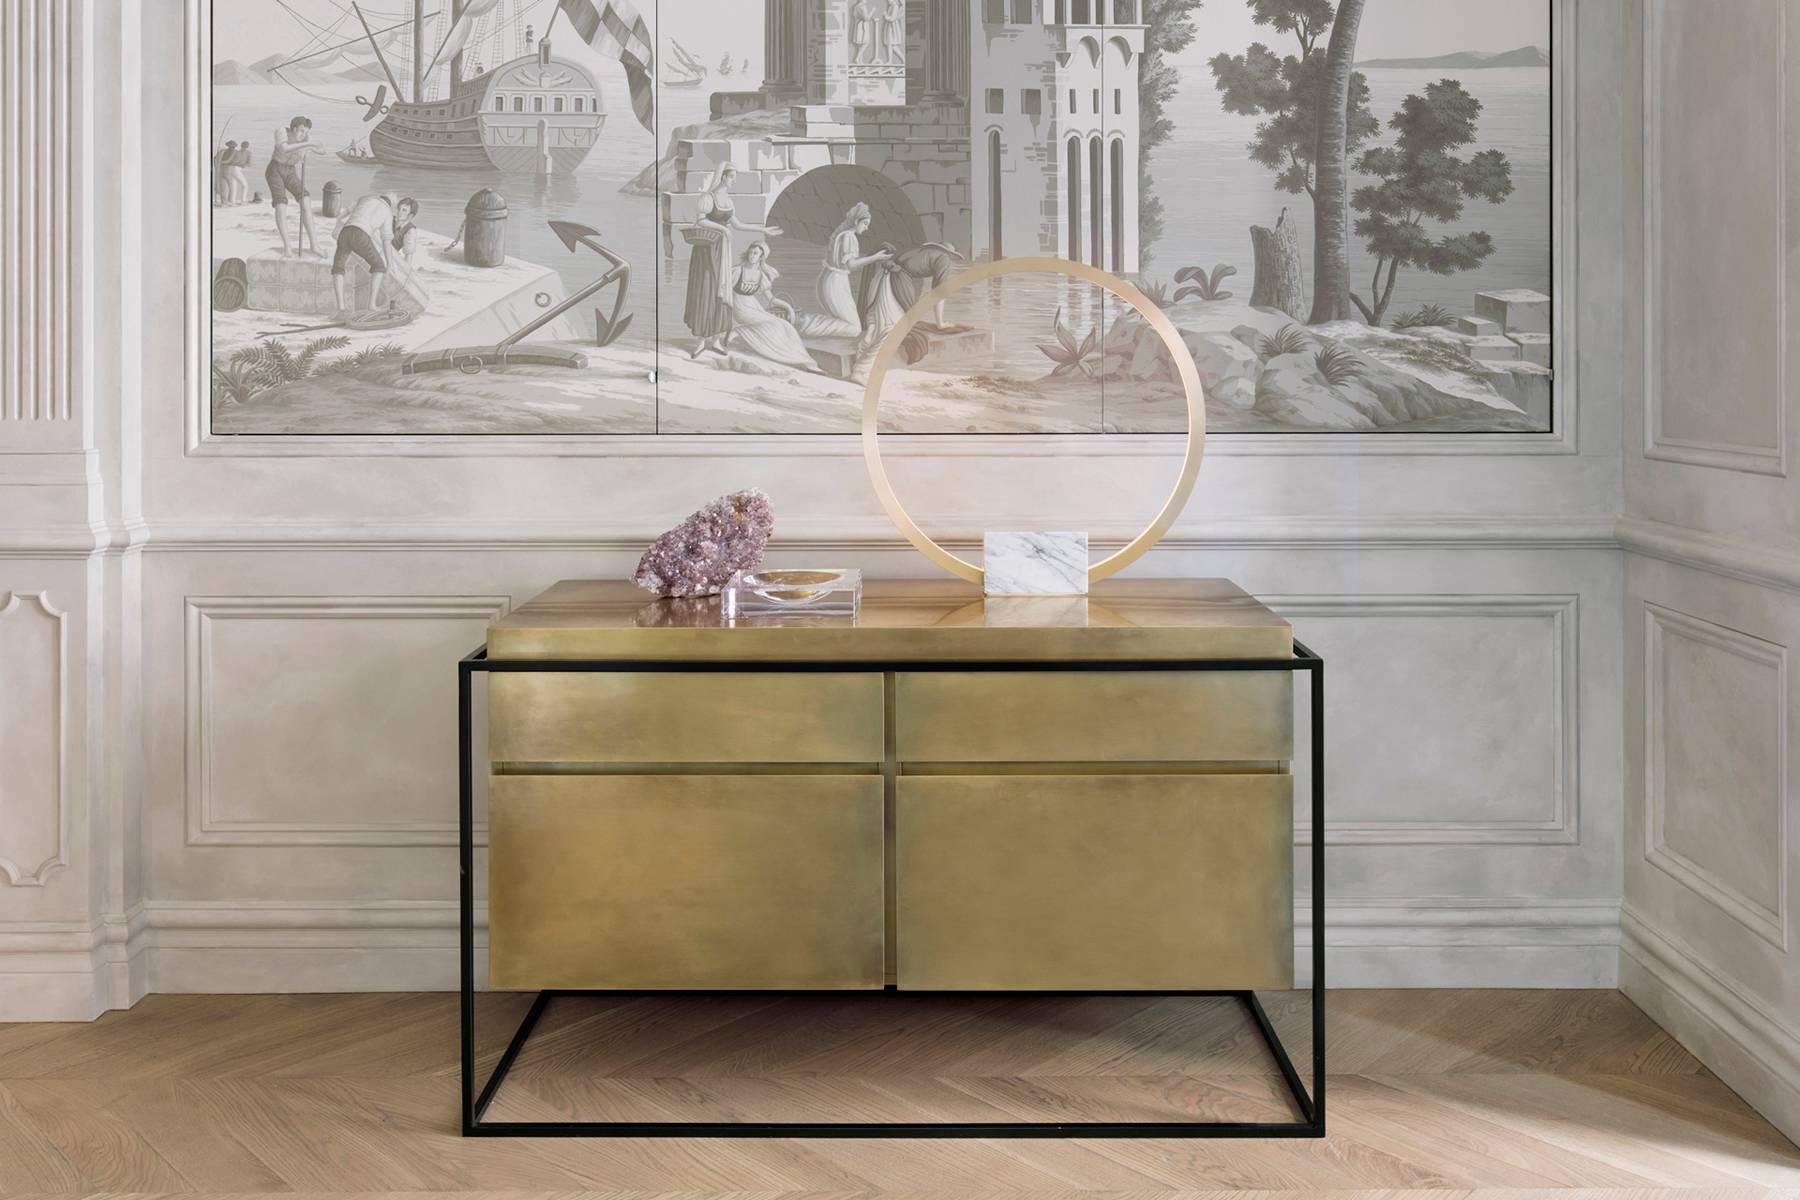 The Hyperion sideboard is a brass-clad carcase suspended within a steel frame. A black stained timber veneer finishes the interior. 
The piece is fitted with two shallow drawers to the top and two deep drawers to the bottom. 
The Hyperion can be